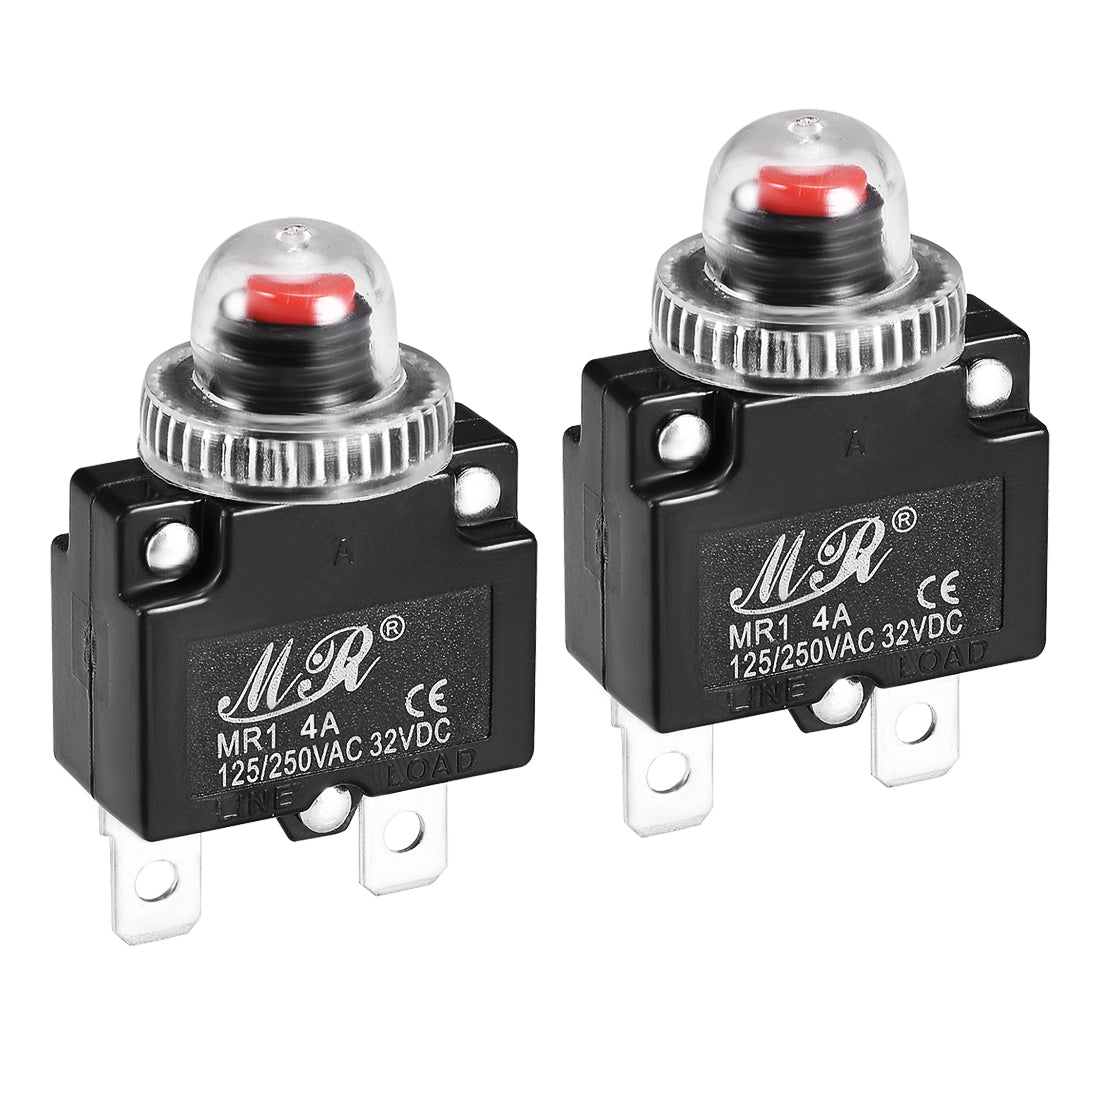 uxcell Uxcell Thermal Circuit Breakers 4A 125/250V AC 32V DC Push Button Reset Overload Protector Switch with Waterproof Cap 2 Pcs